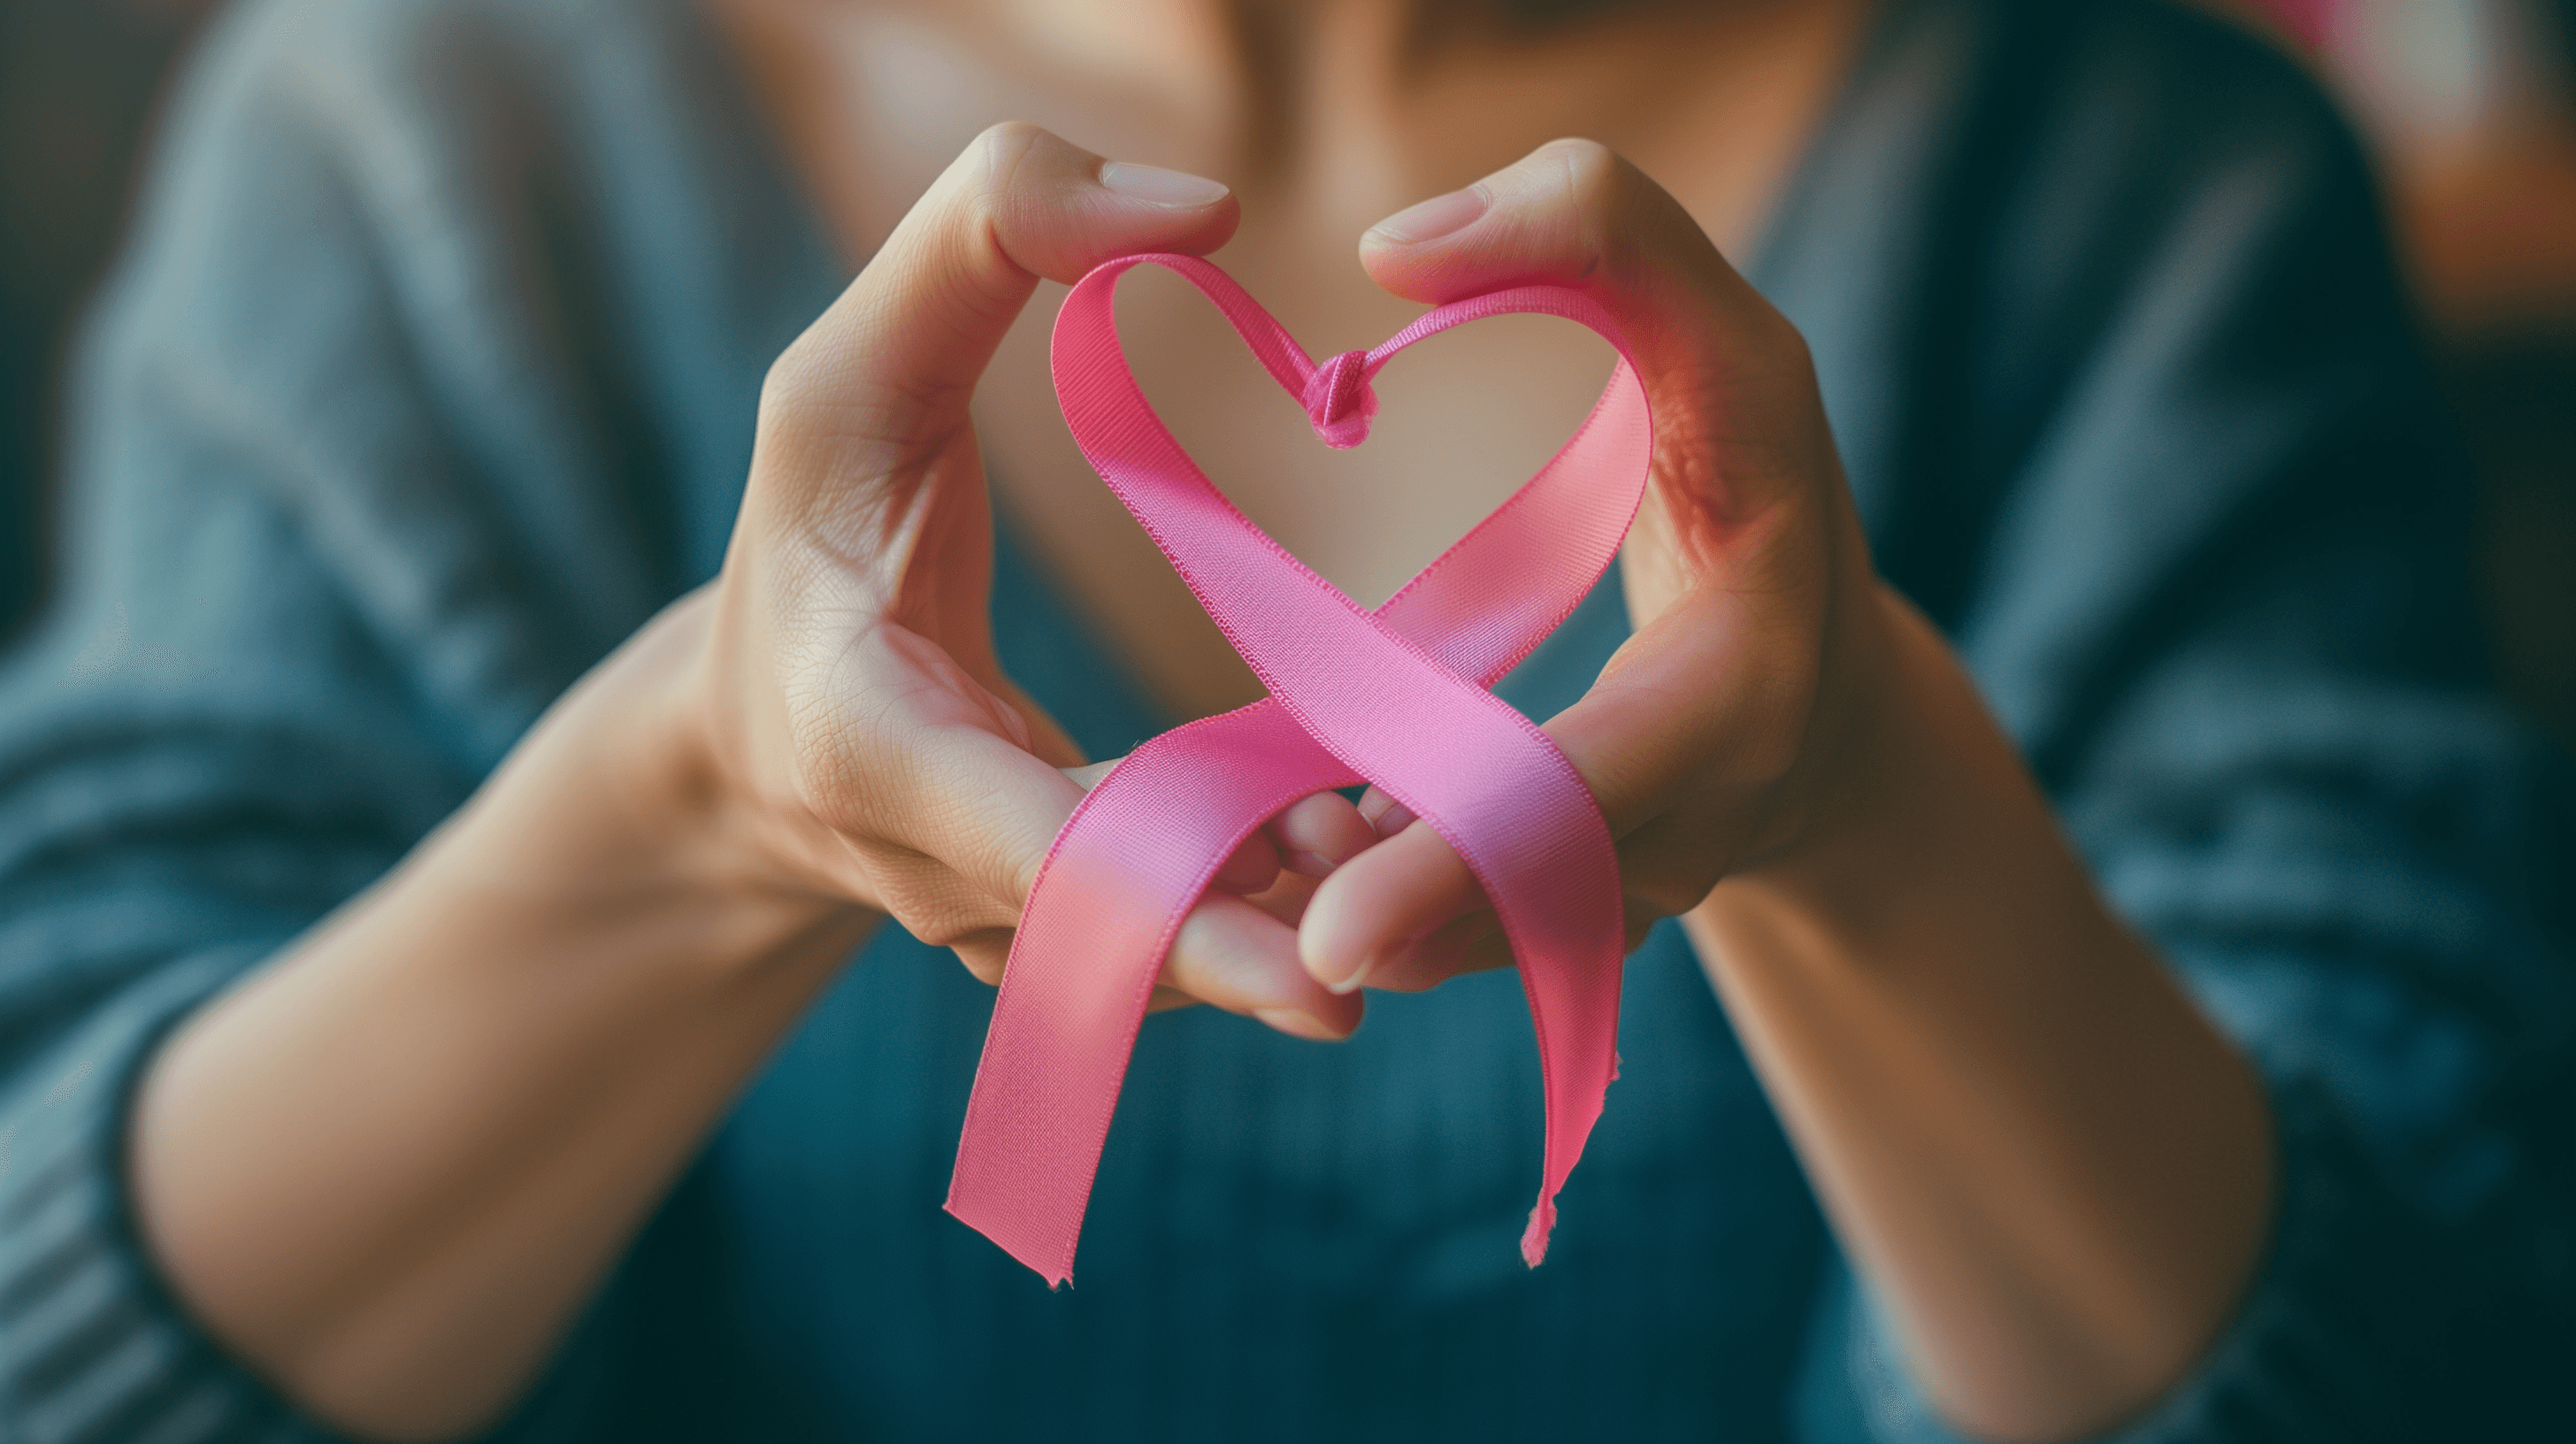 What is Breast Cancer?